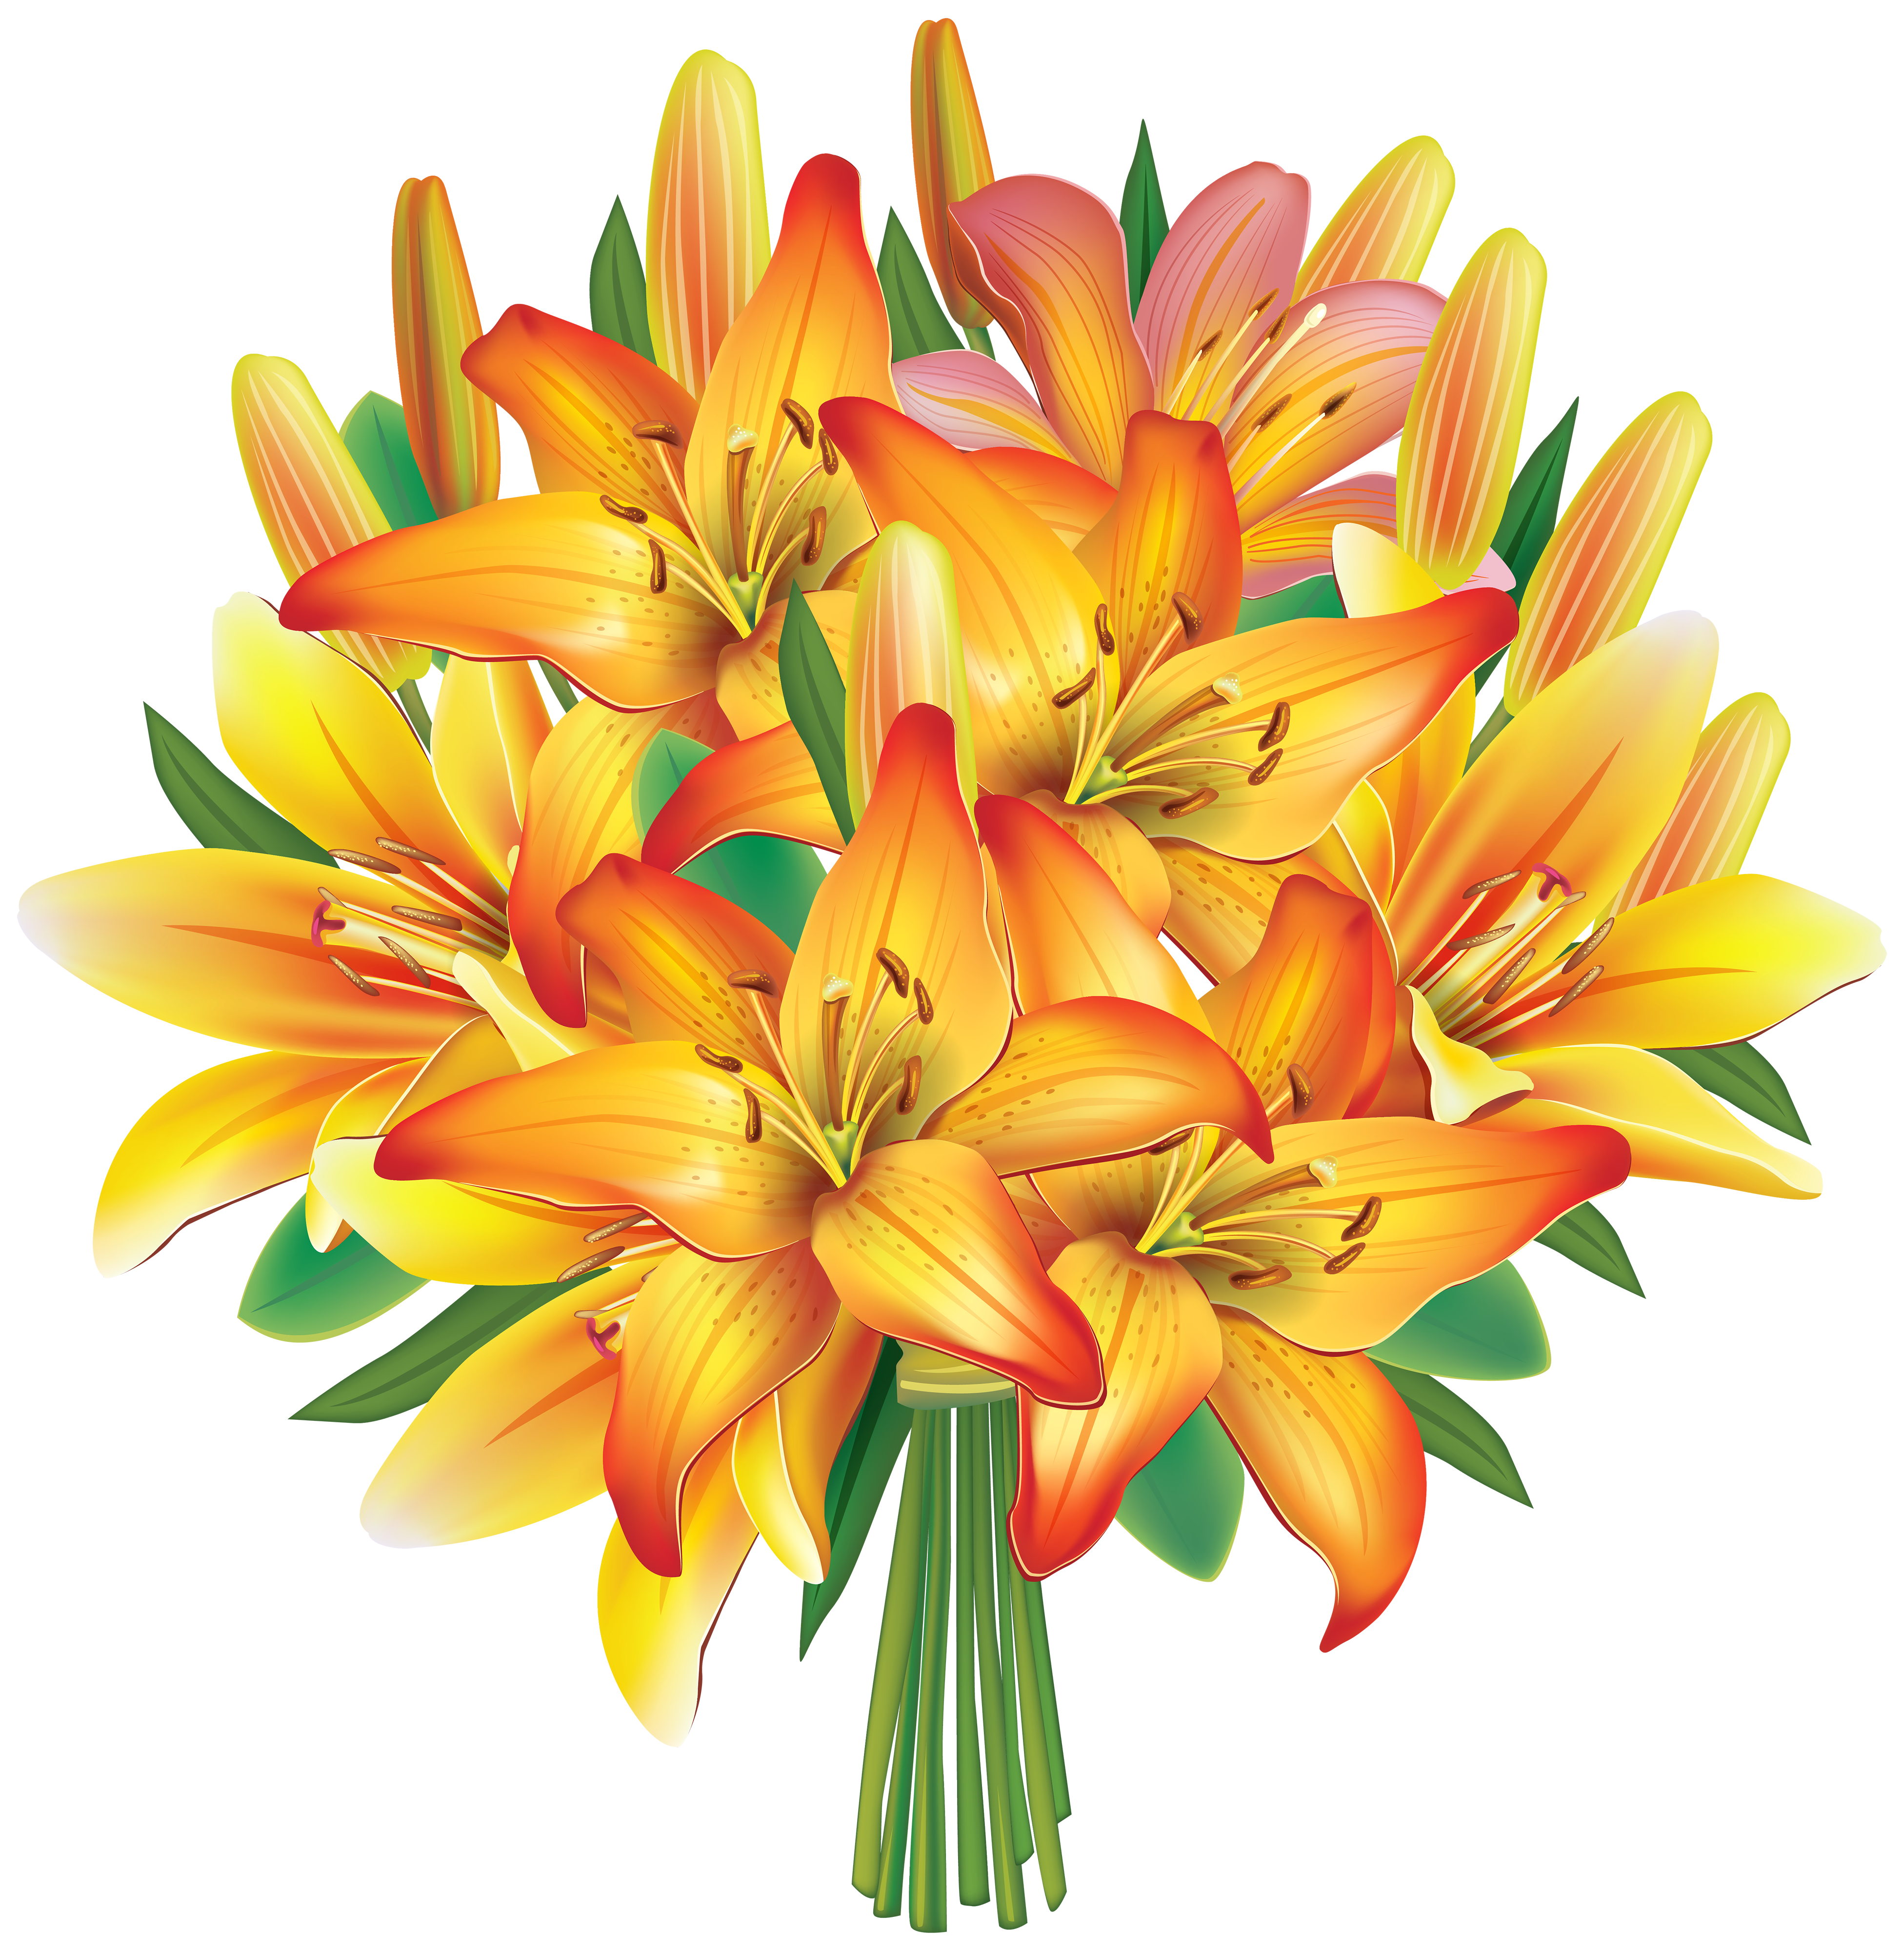 Bouquet at getdrawings com. Peony clipart flower bunch